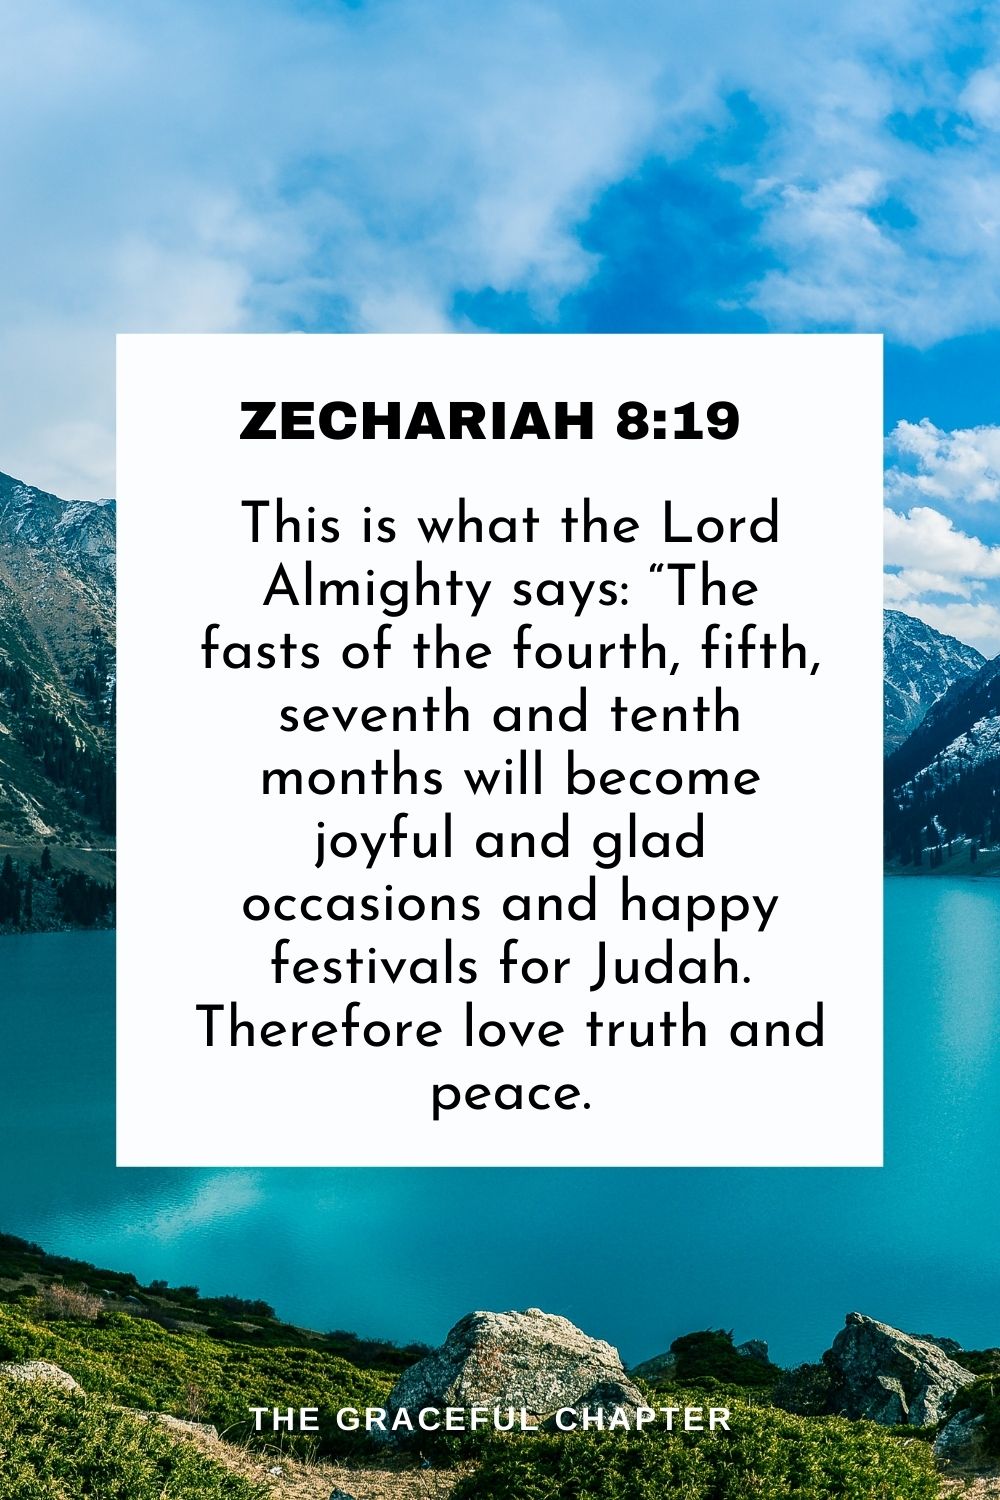 This is what the Lord Almighty says: “The fasts of the fourth, fifth, seventh and tenth months will become joyful and glad occasions and happy festivals for Judah. Therefore love truth and peace. Zechariah 8:19